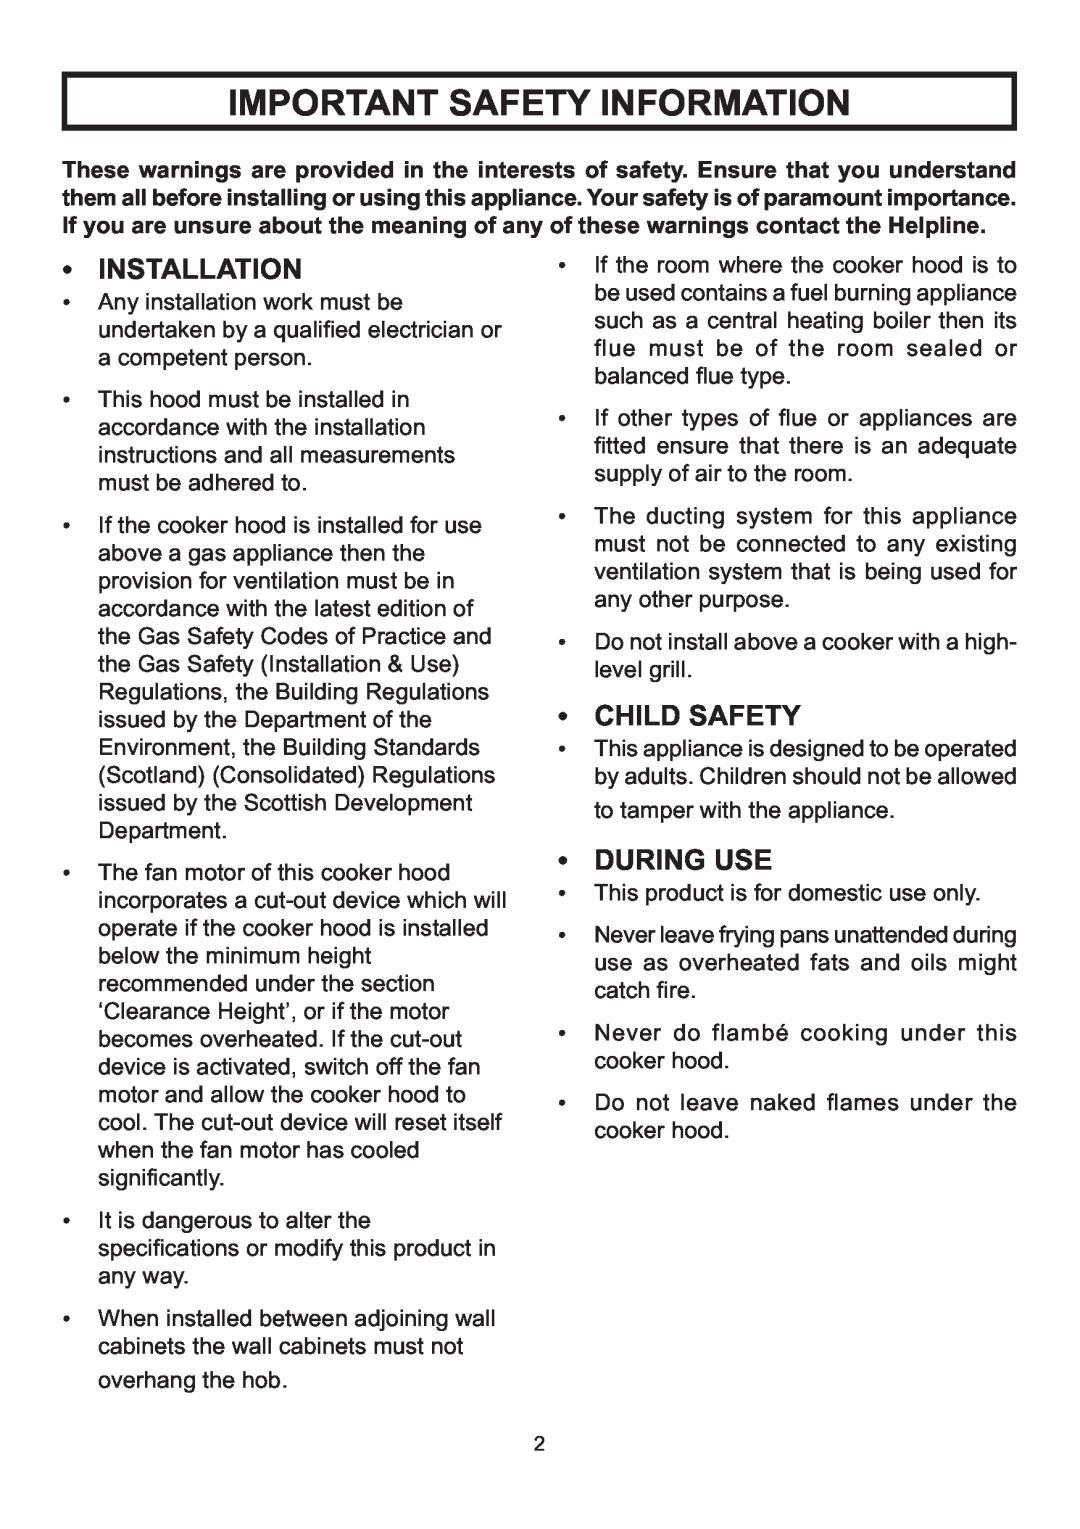 Rangemaster LEIHDS120SC installation instructions Important Safety Information, Installation, Child Safety, During Use 